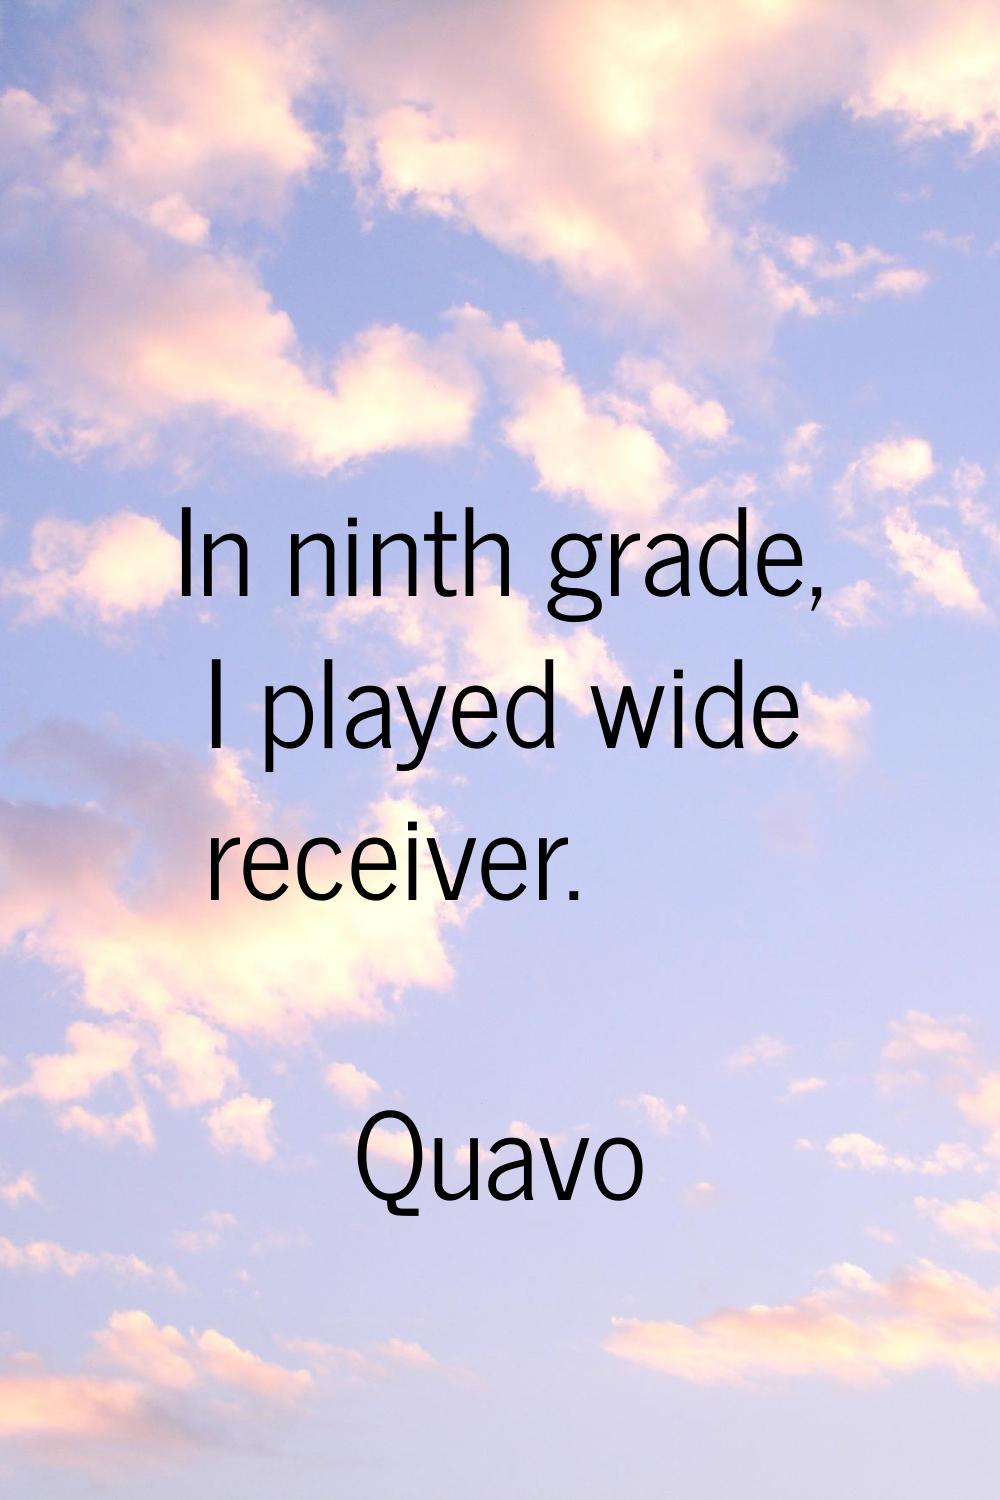 In ninth grade, I played wide receiver.